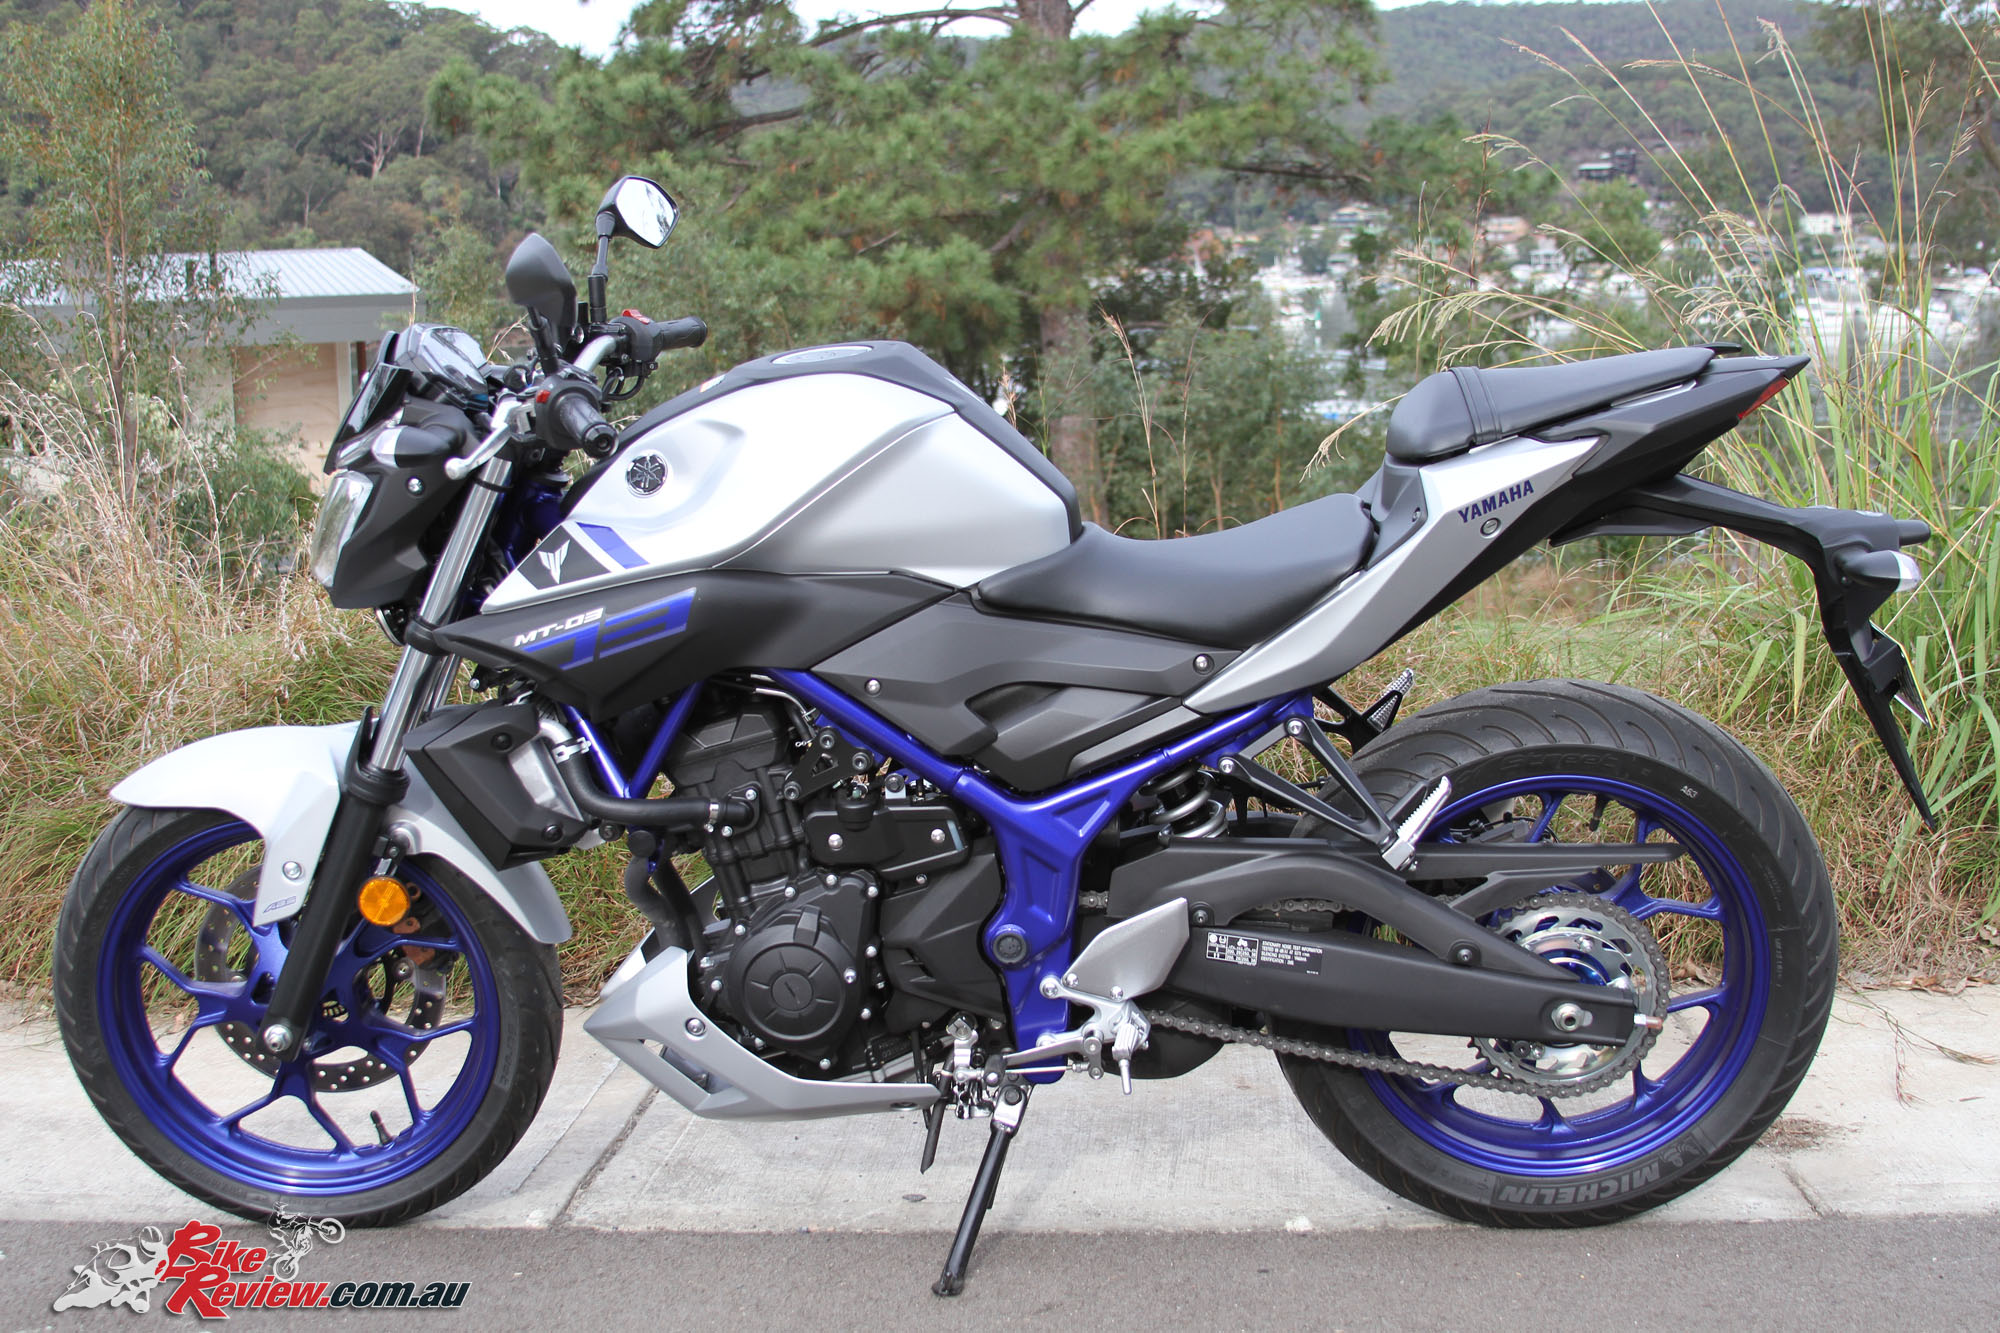 2016 Yamaha MT-03 Naked Motorcycle Review, Specs, Photos 